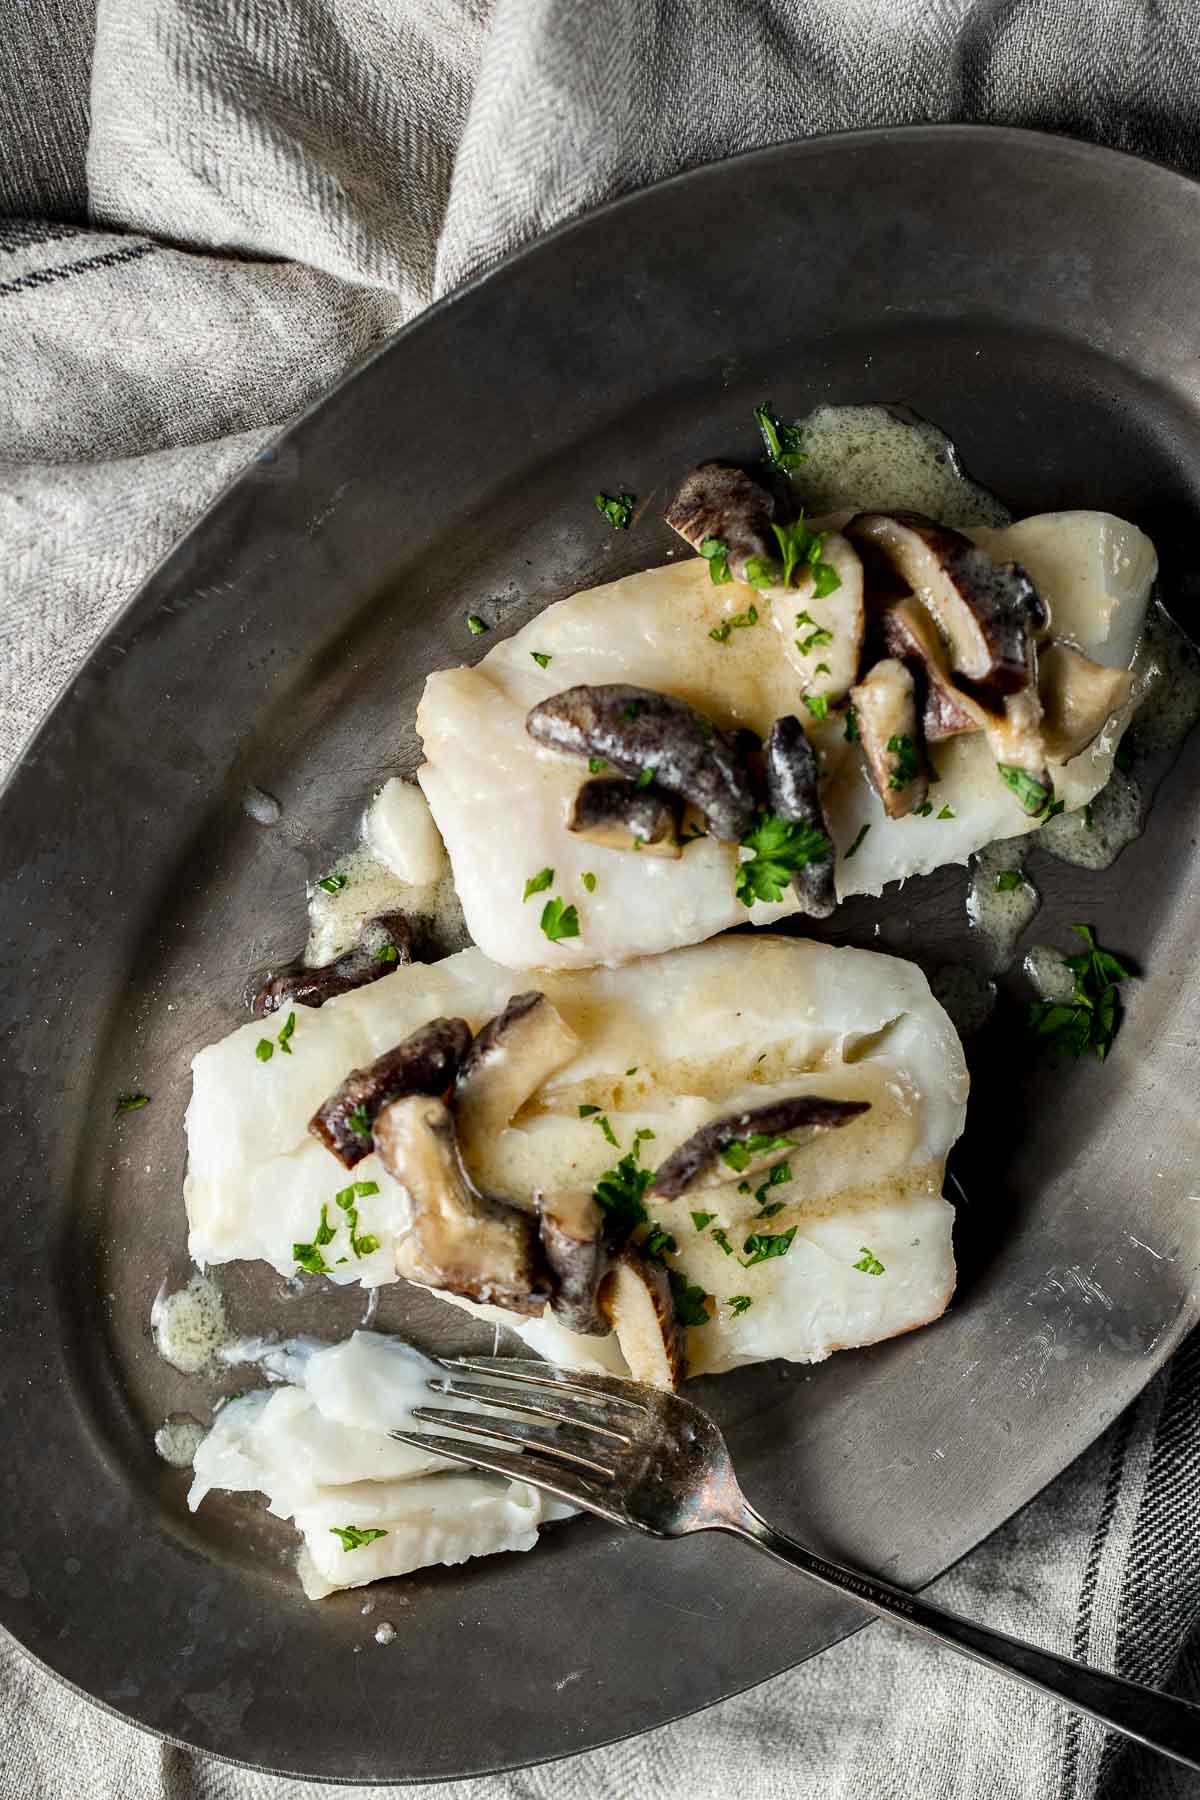 Two cod fillets served on a platter with mushroom sauce on top.